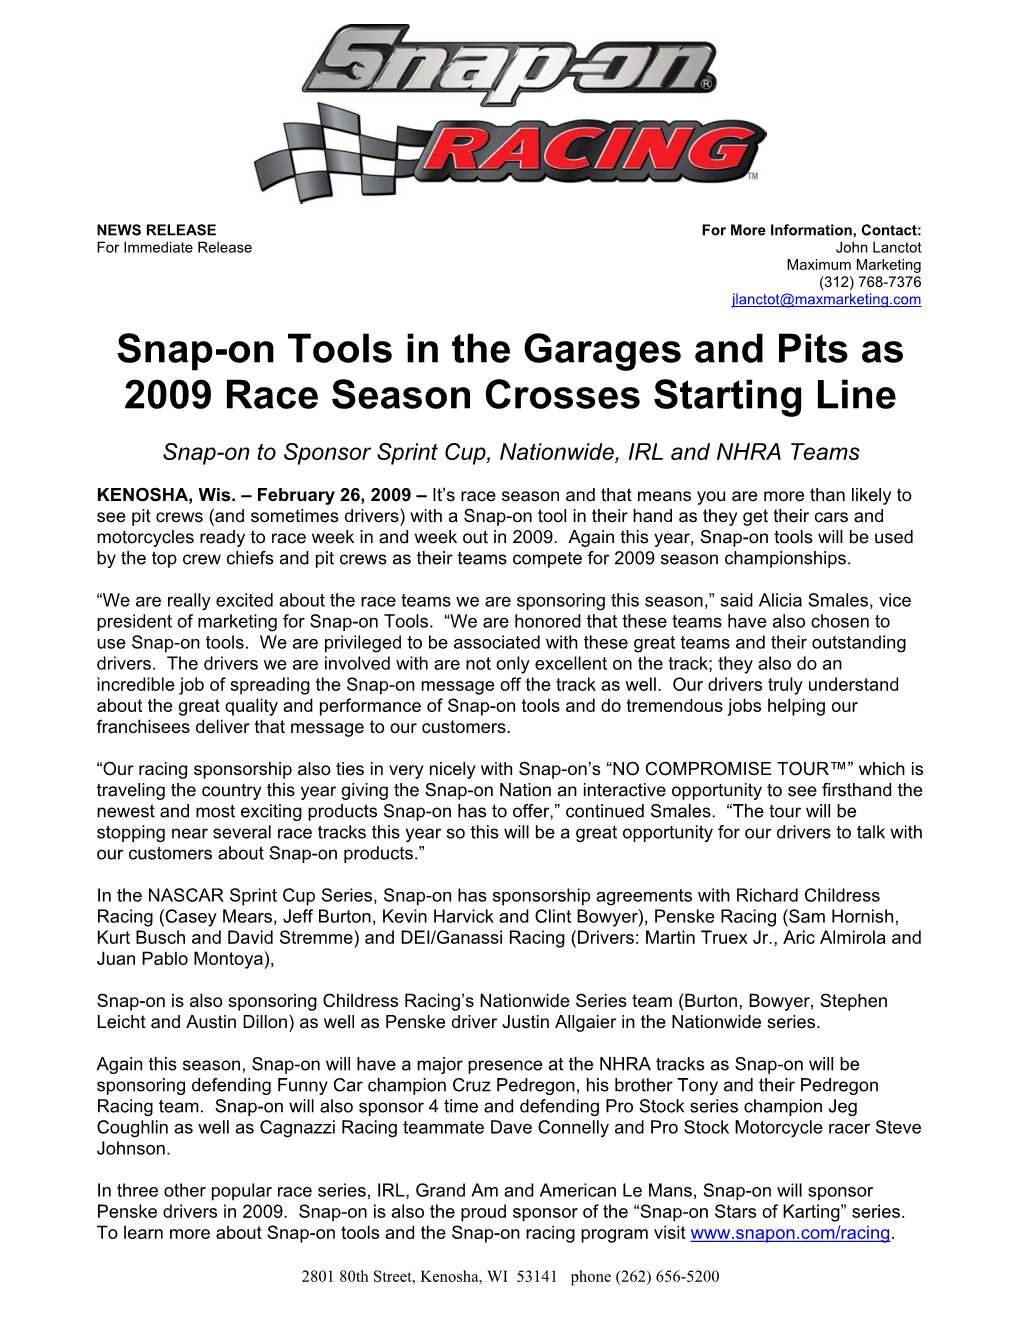 Snap-On Tools in the Garages and Pits As 2009 Race Season Crosses Starting Line